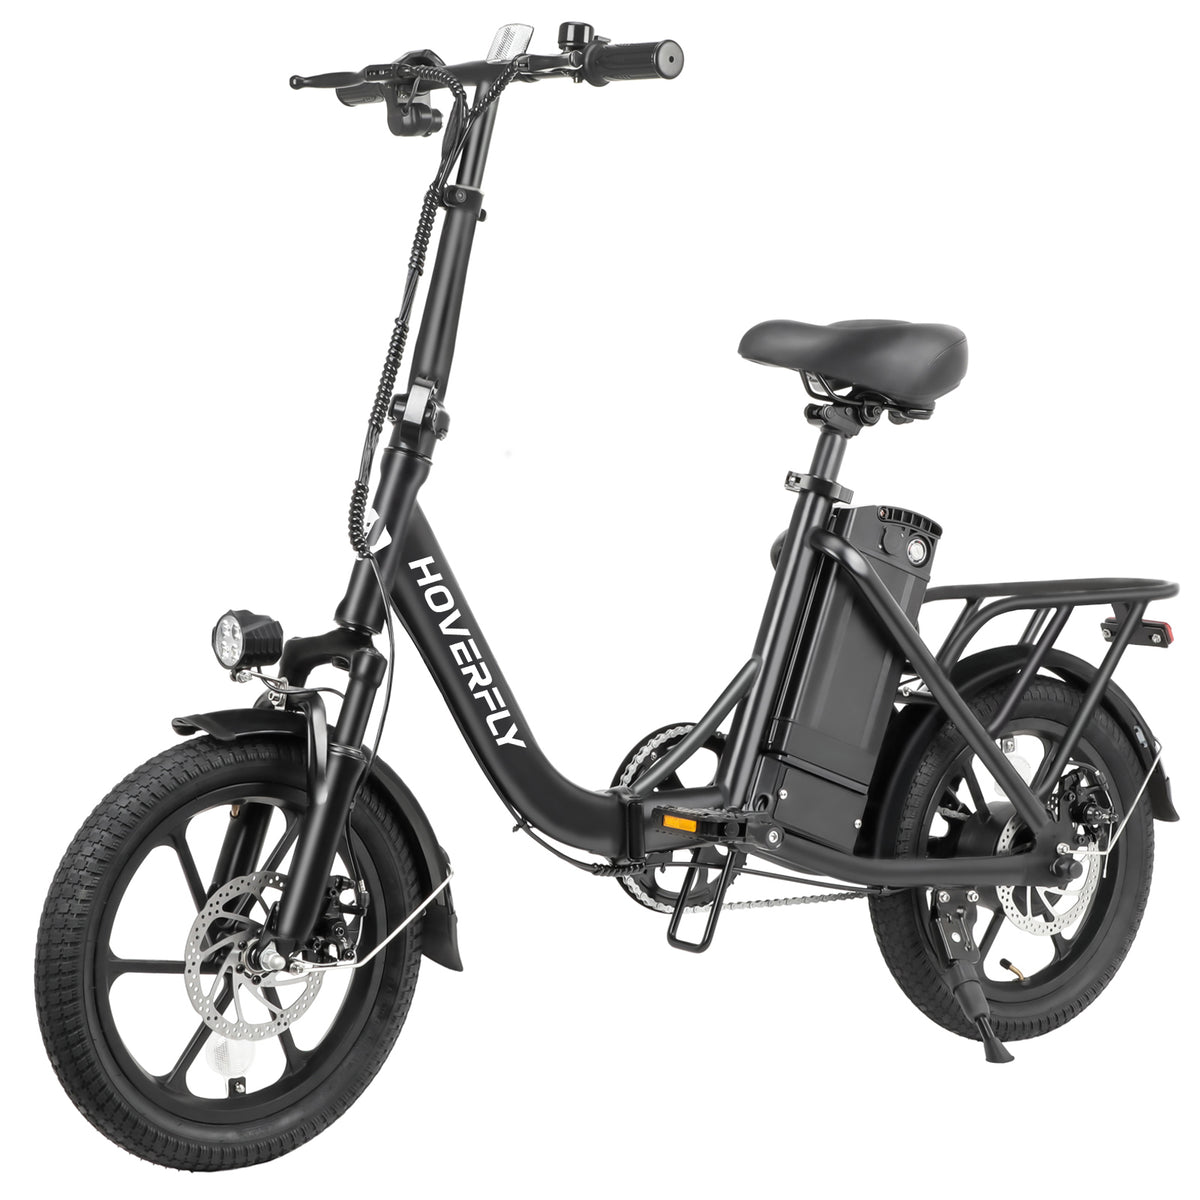 Hoverfly H3 Foldable Electric Bike (Black): Your Urban Exploration Companion, 500W Power, 15.5MPH Speed, 15.5+ Mile Range, Adjustable Comfort, Easy Fold for Storage.